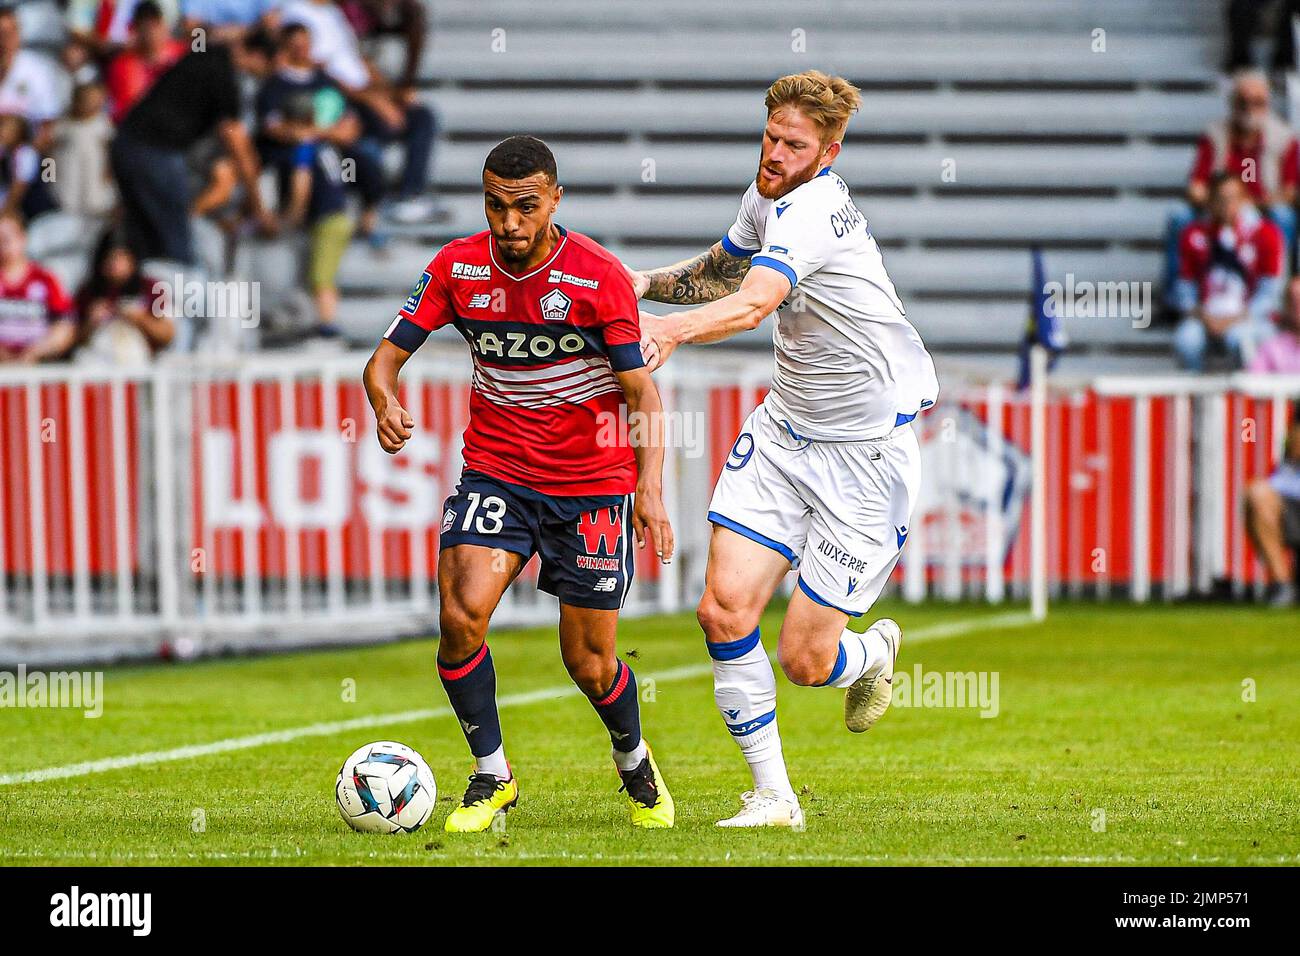 LILLE, FRANCE - AUGUST 7: Akim Zedadka of Lille, Gaetan Charbonnier of Auxerre during the French Ligue 1 match between Lille and Auxerre at Stade Pierre Mauroy on August 7, 2022 in Lille, France (Photo by Matthieu Mirville/Orange Pictures) Stock Photo